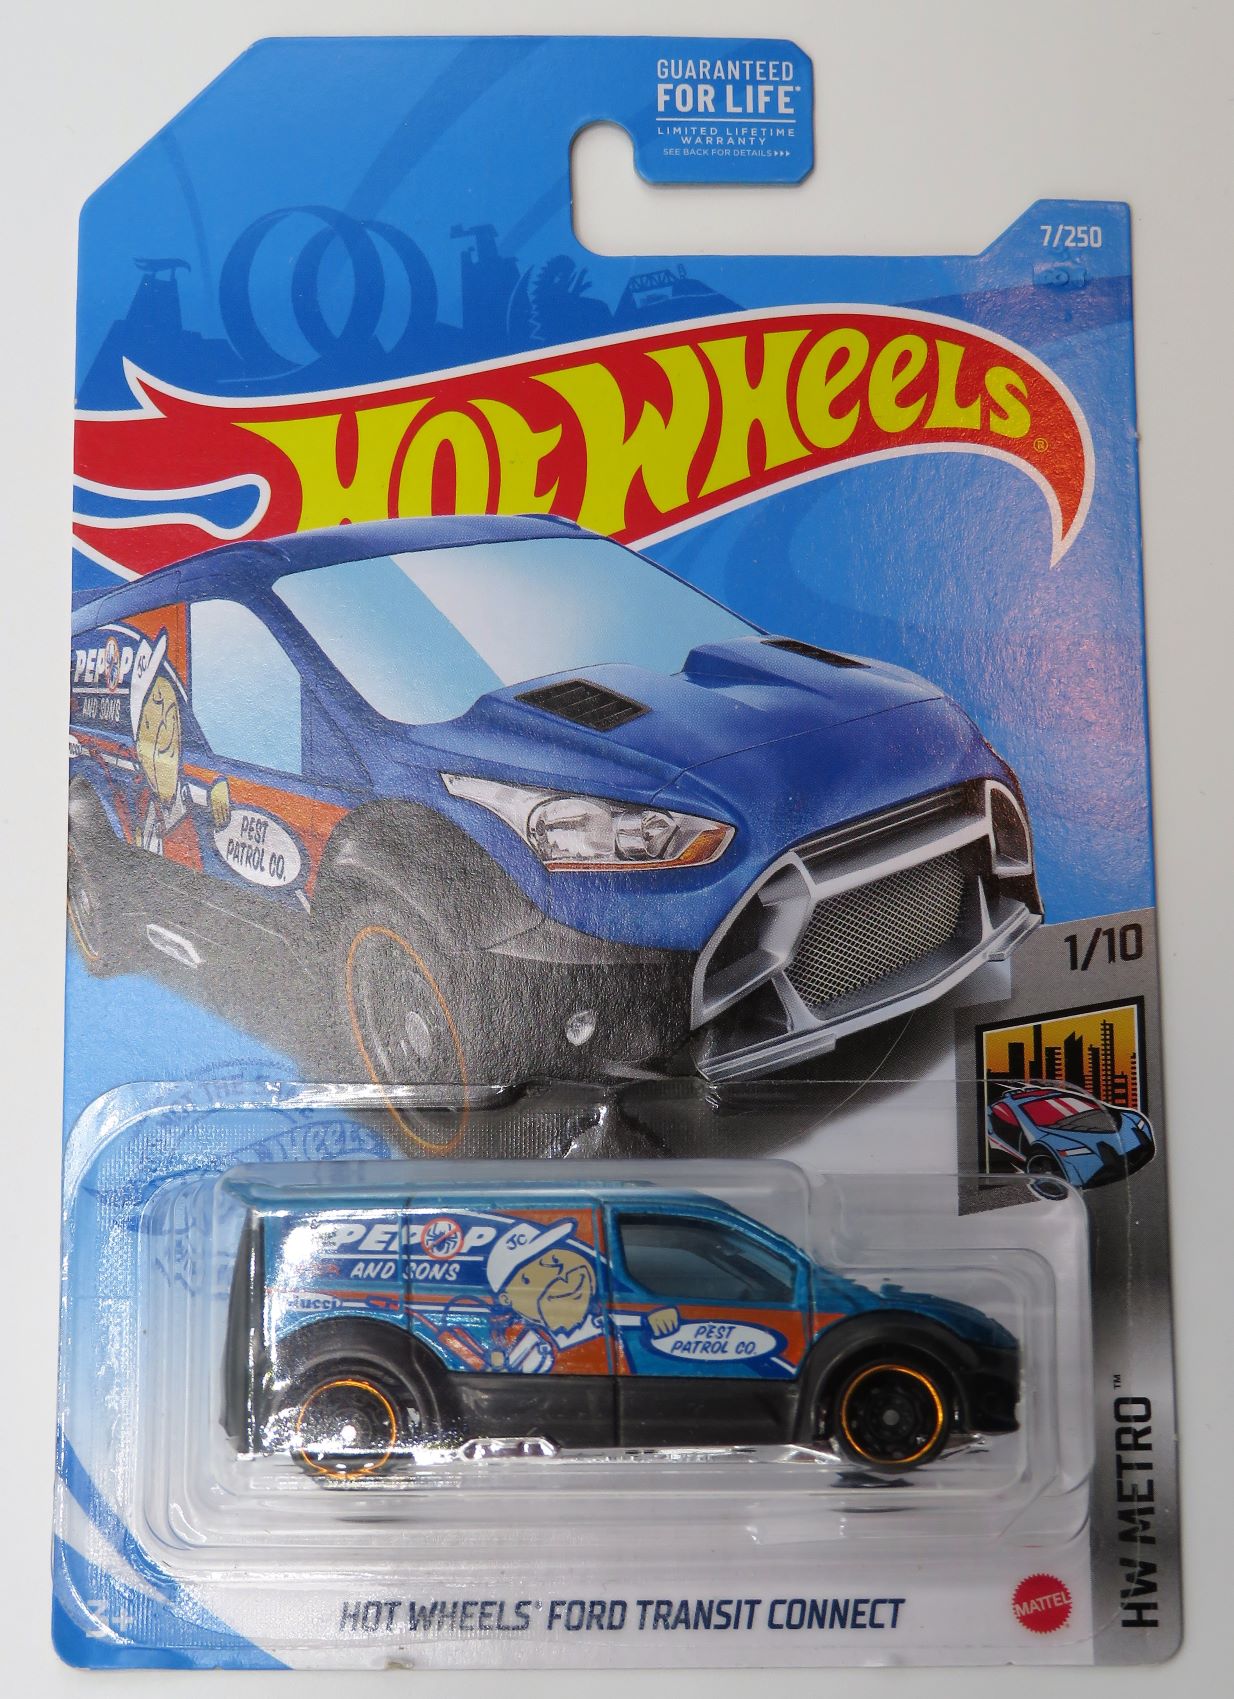 2021-hot-wheels-ford-transit-connect-01.jpg